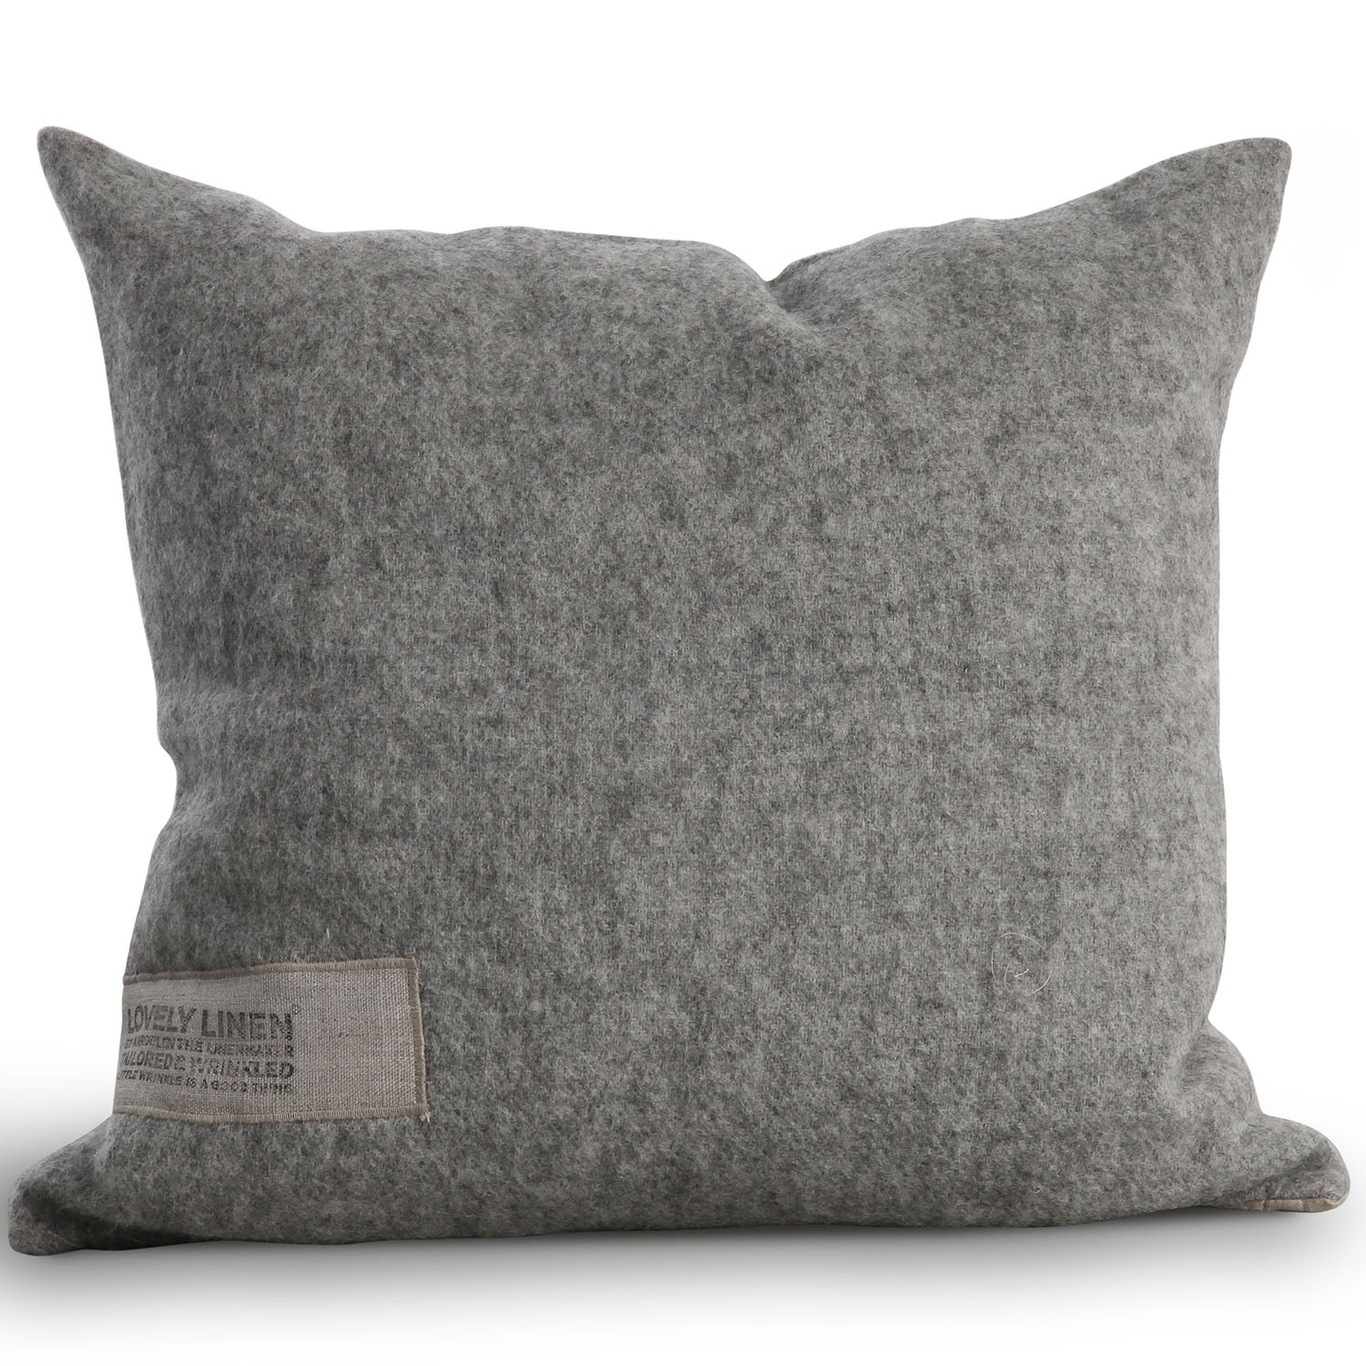 Lovely Cushion Cover Wool 50x50 cm, Natural Beige